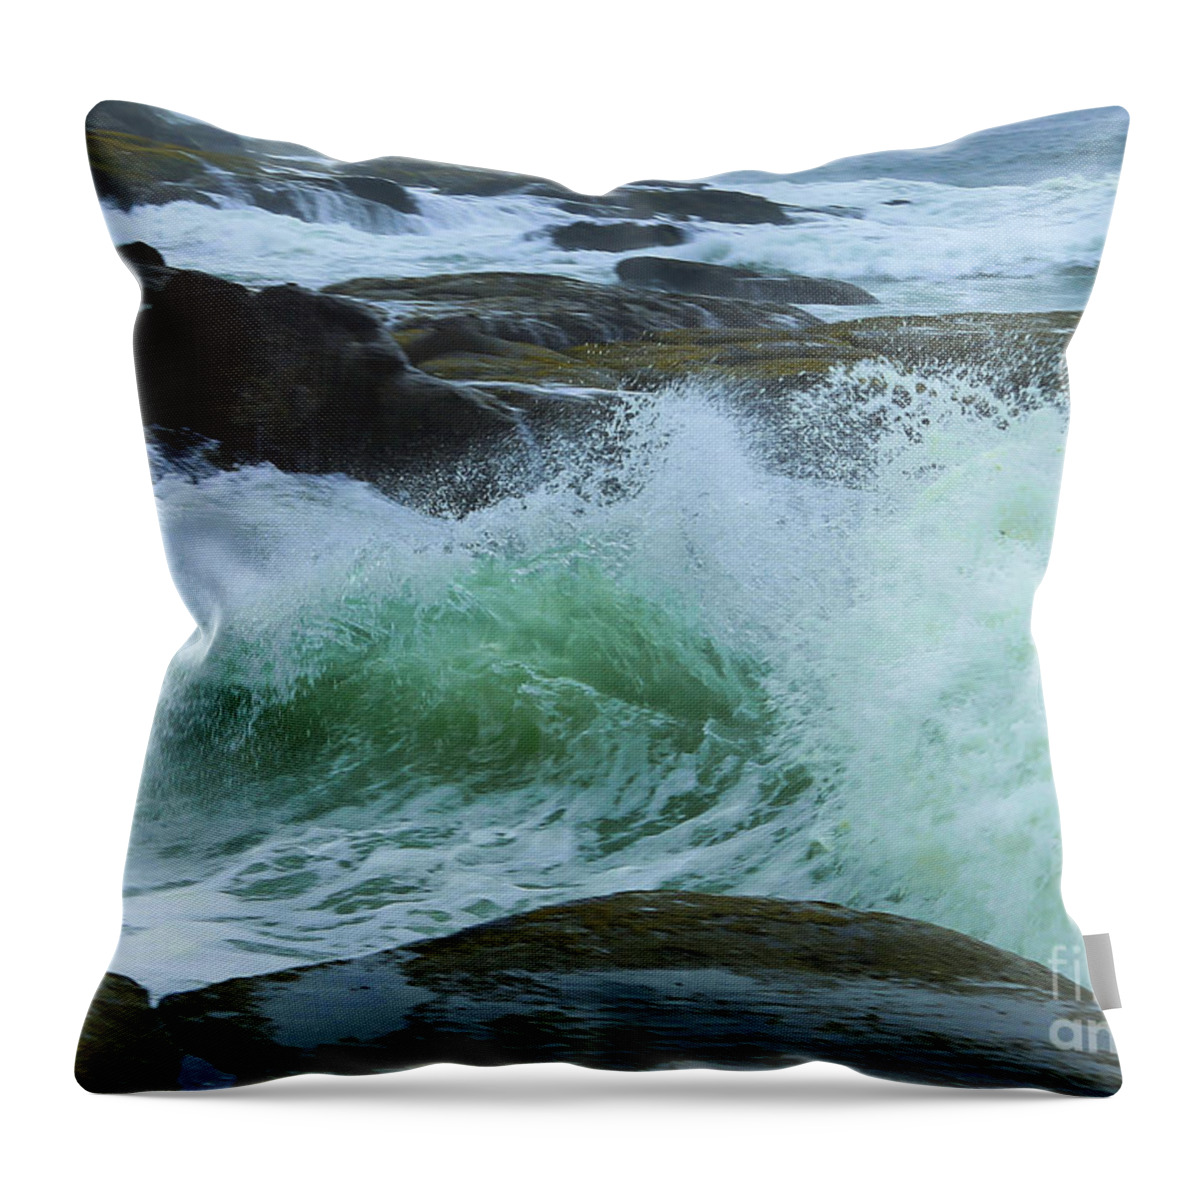 Seascape Throw Pillow featuring the photograph Winter Wave by Jeanette French